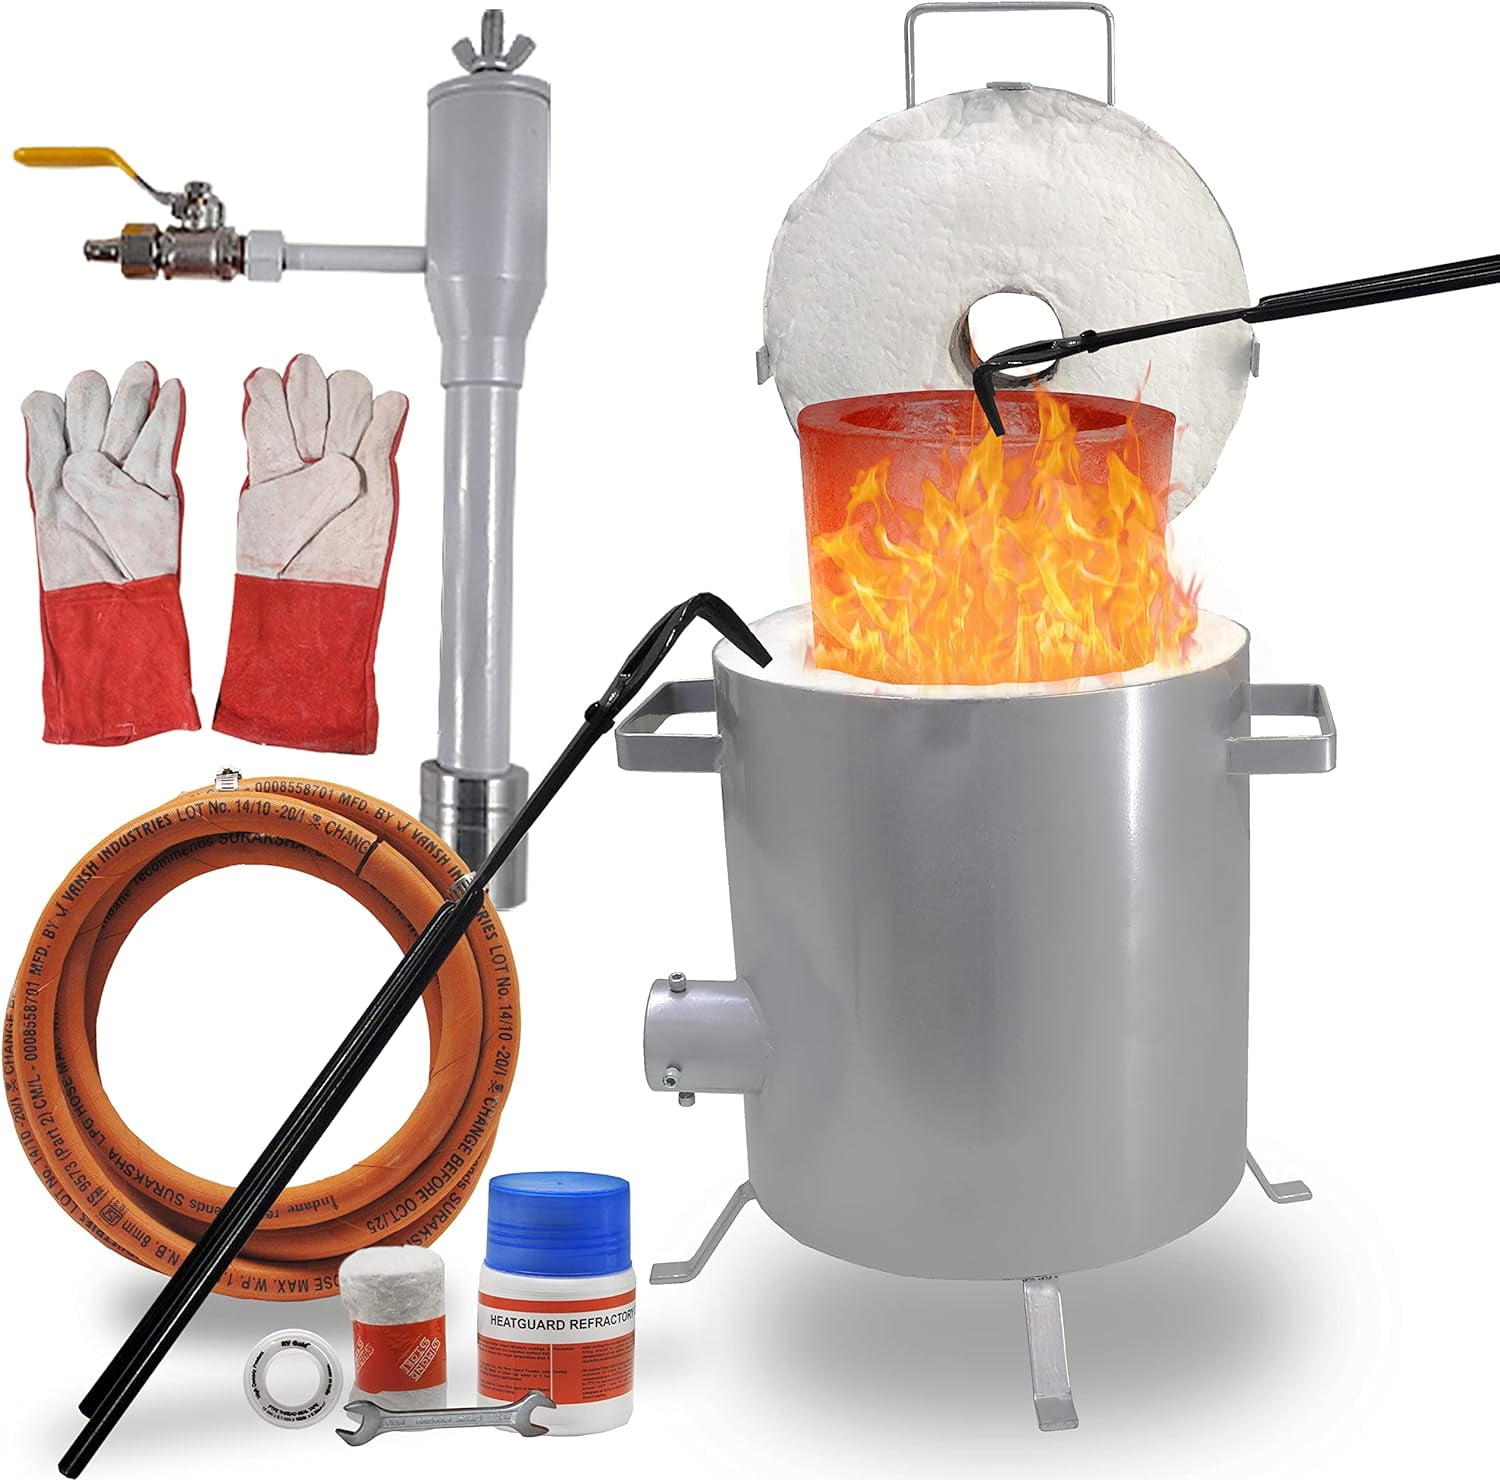 Nelyrho 12kg Large Propane Melting Furnace Kit with Two Crucible Tongs, Full Stainless Steel Foundry Klin Smelting Gold Silver Copper Aluminum Metal